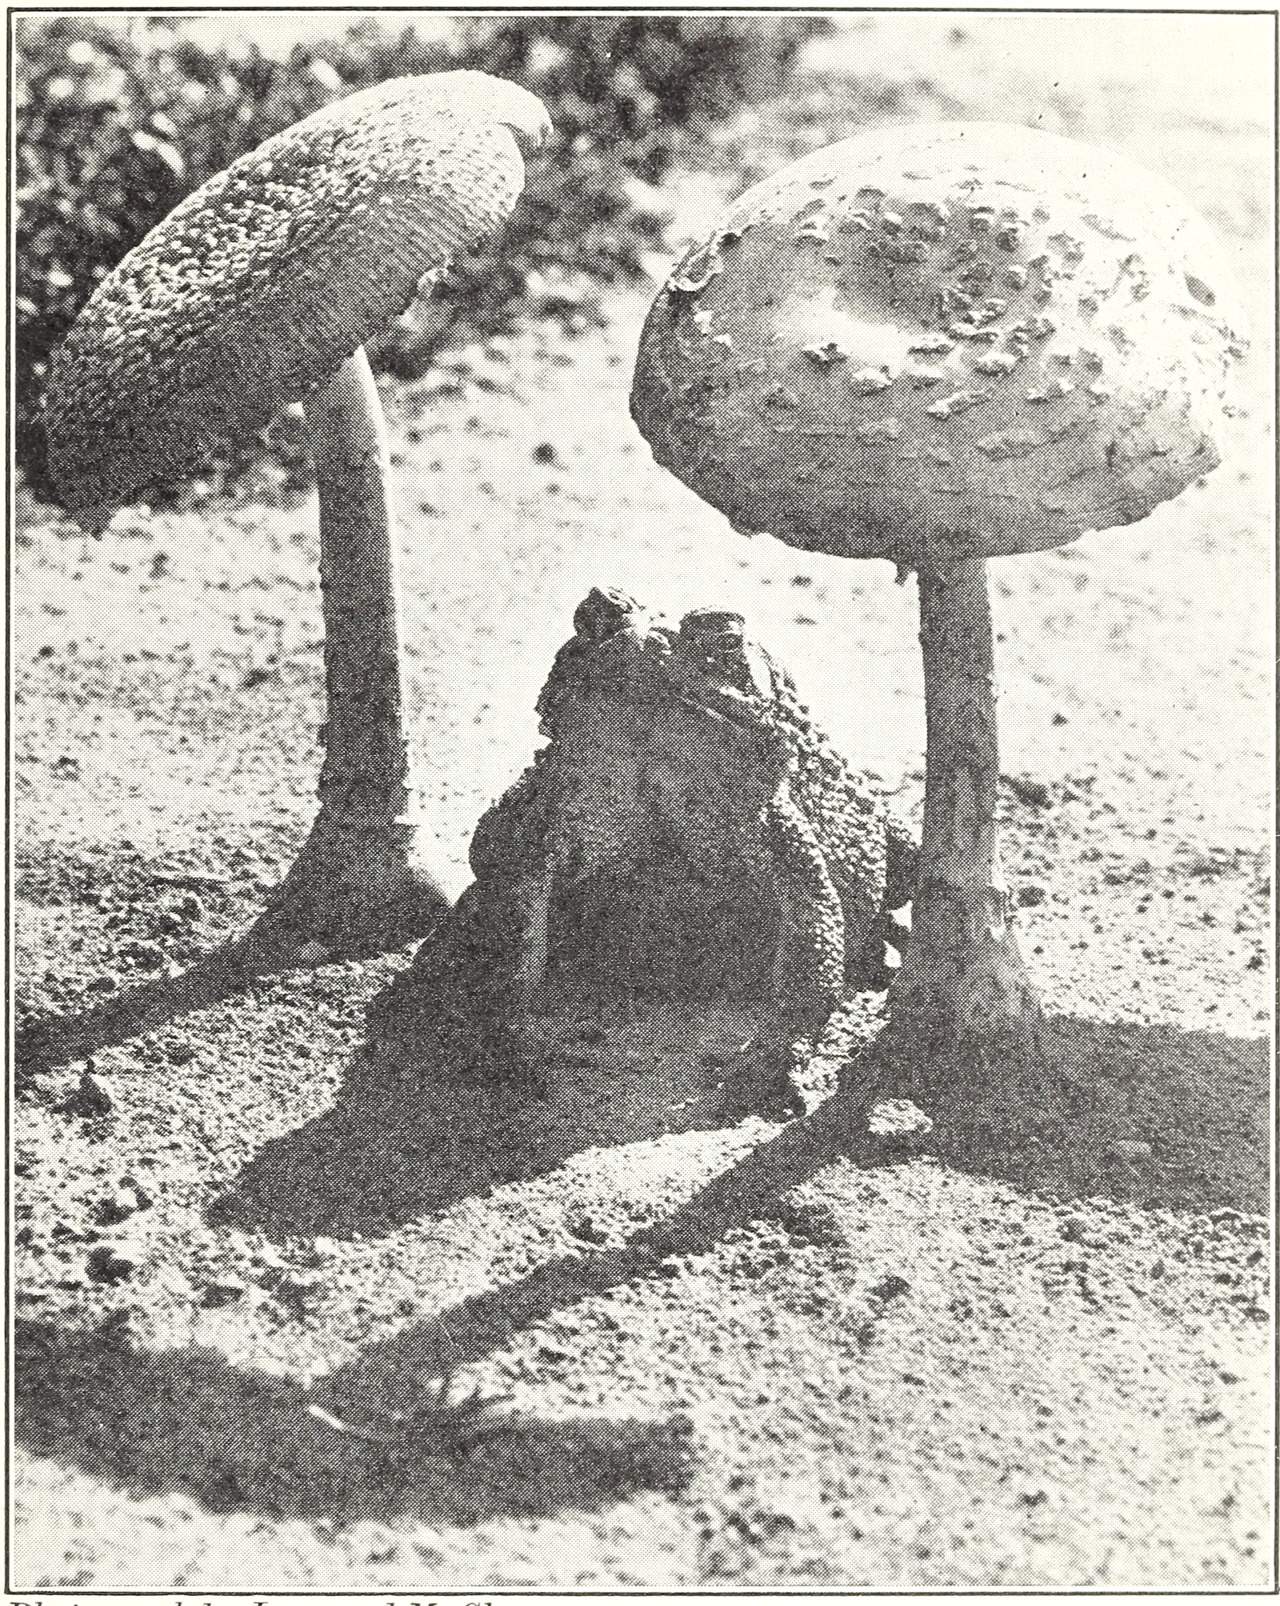 With its protective coloring this toad feels much at ease near mushrooms.” Elementary Science by Grades, Book Five. 1930.